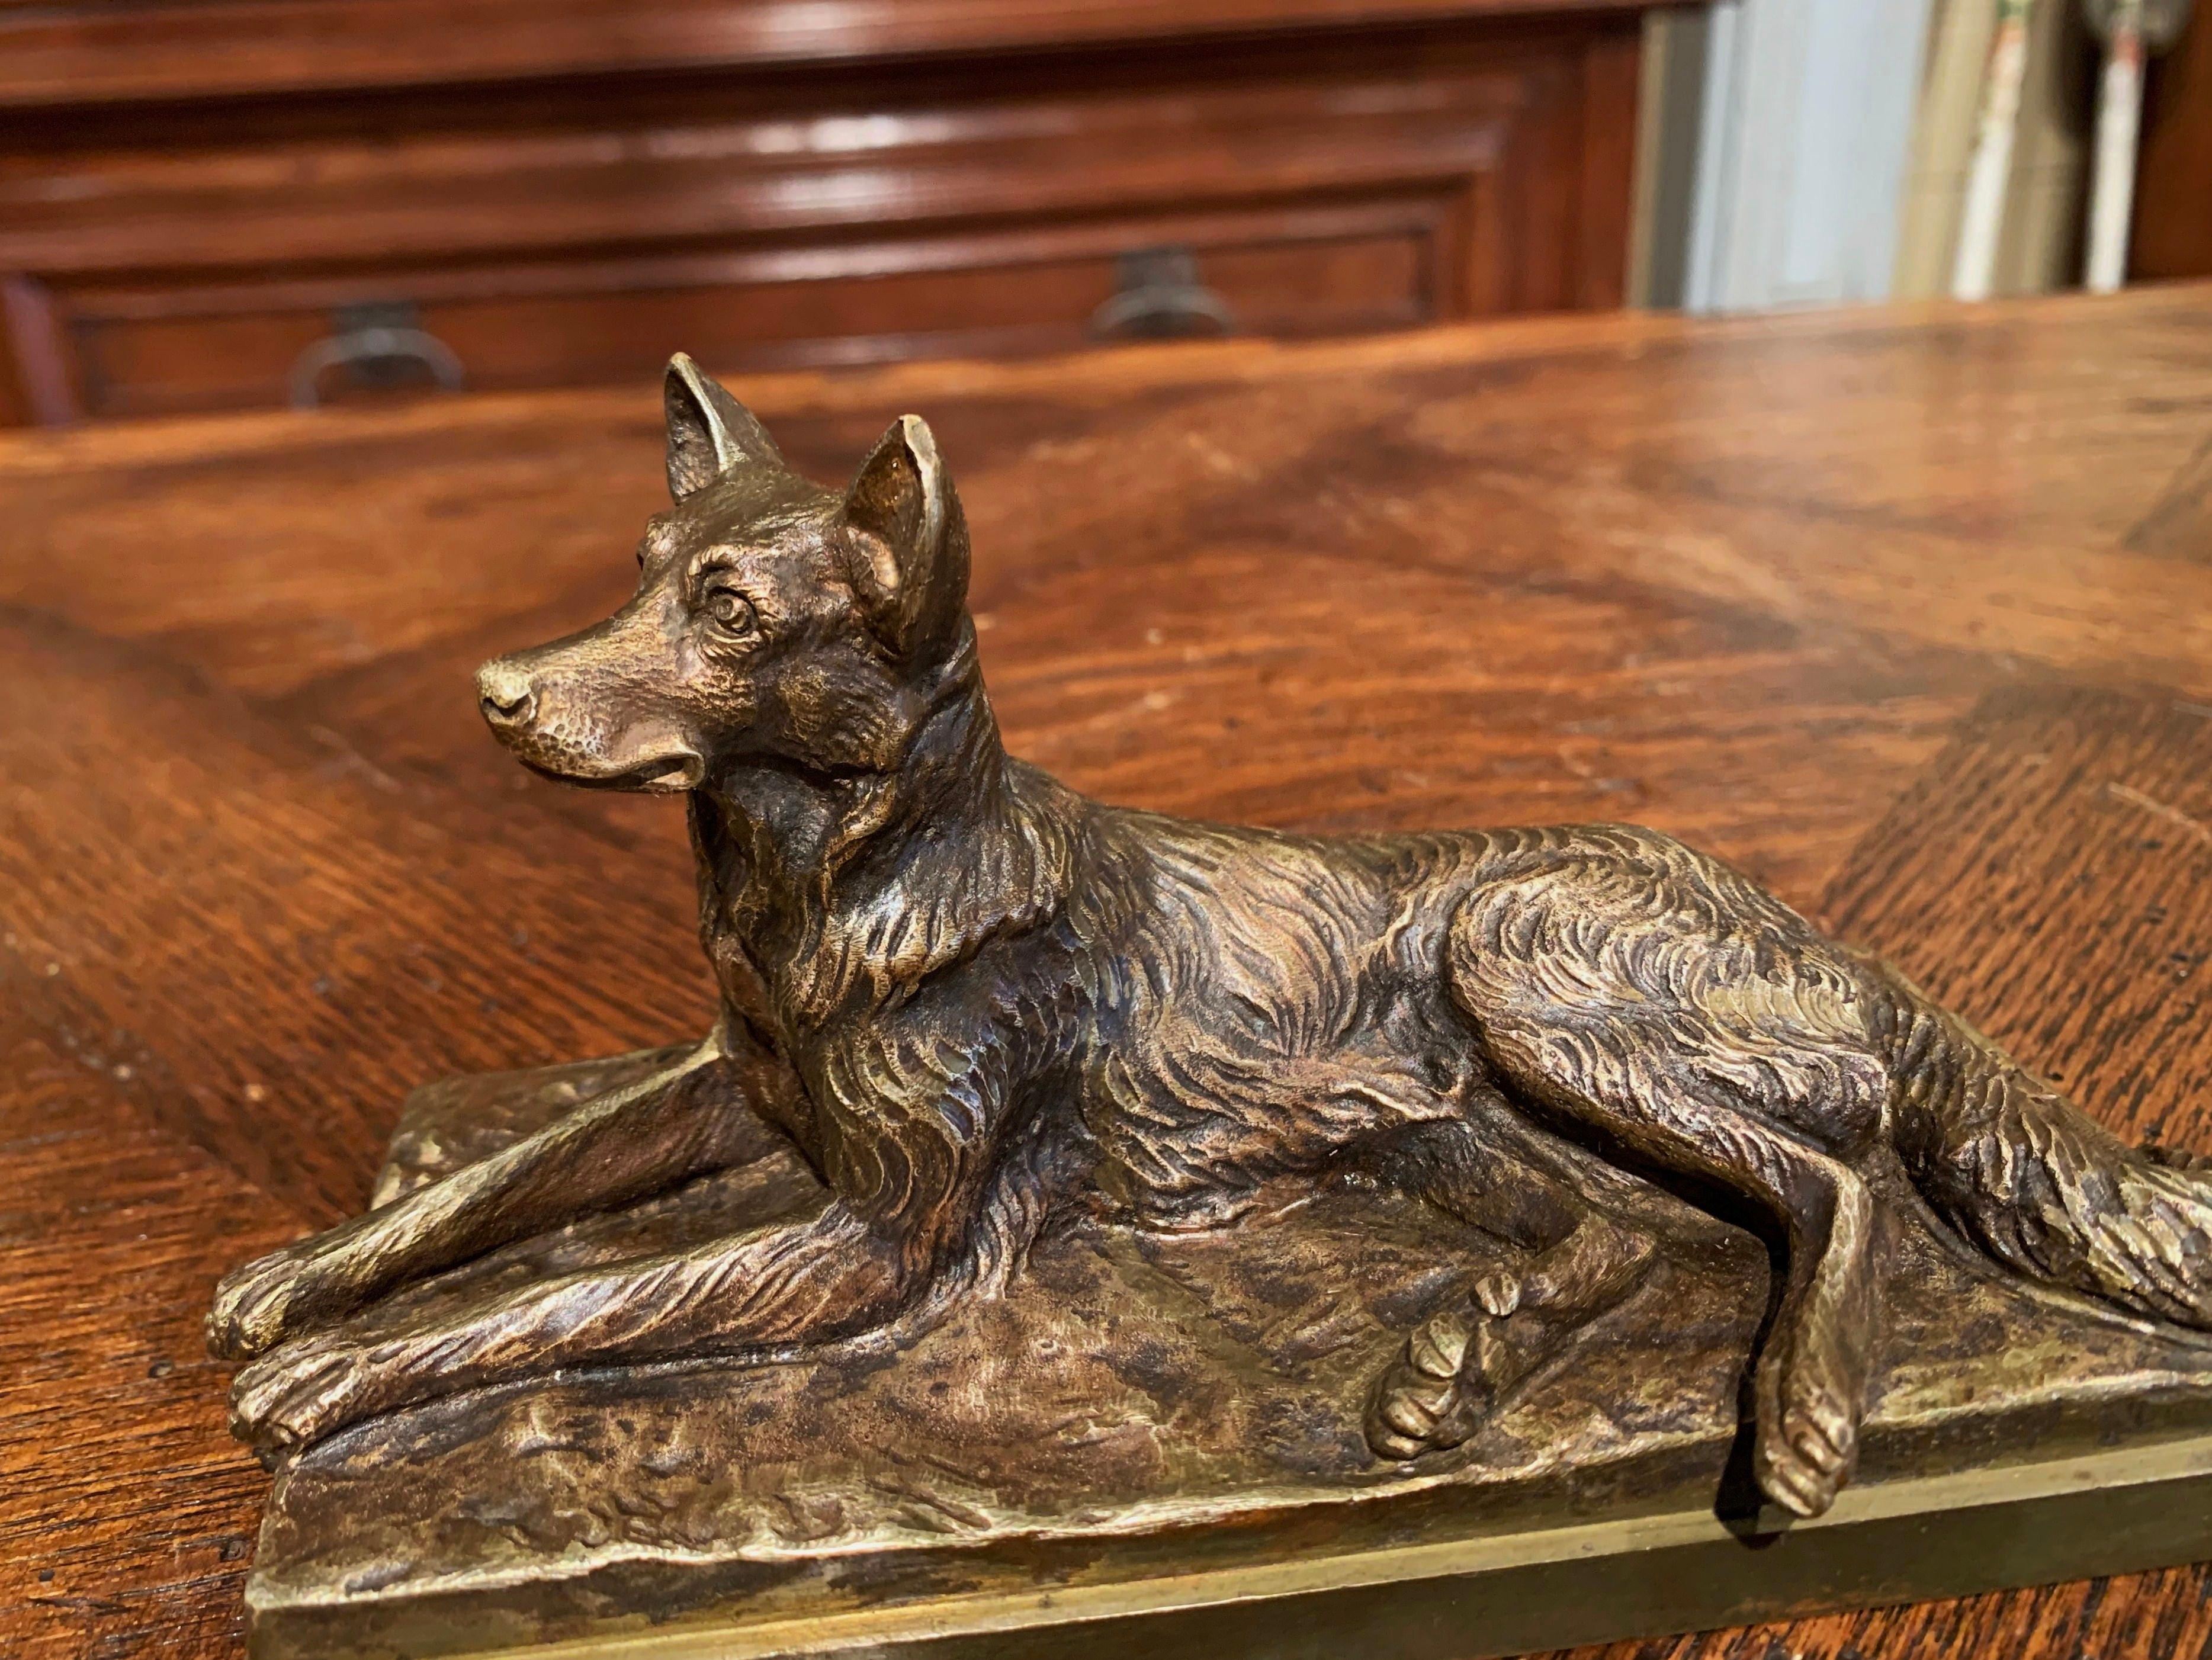 This antique bronze sculpture was created in France, circa 1890. The composition features a German shepherd lying on rocky ground. The dog figure is signed on the back by the artist, Albert Laplanche. The elegant piece is in excellent condition with